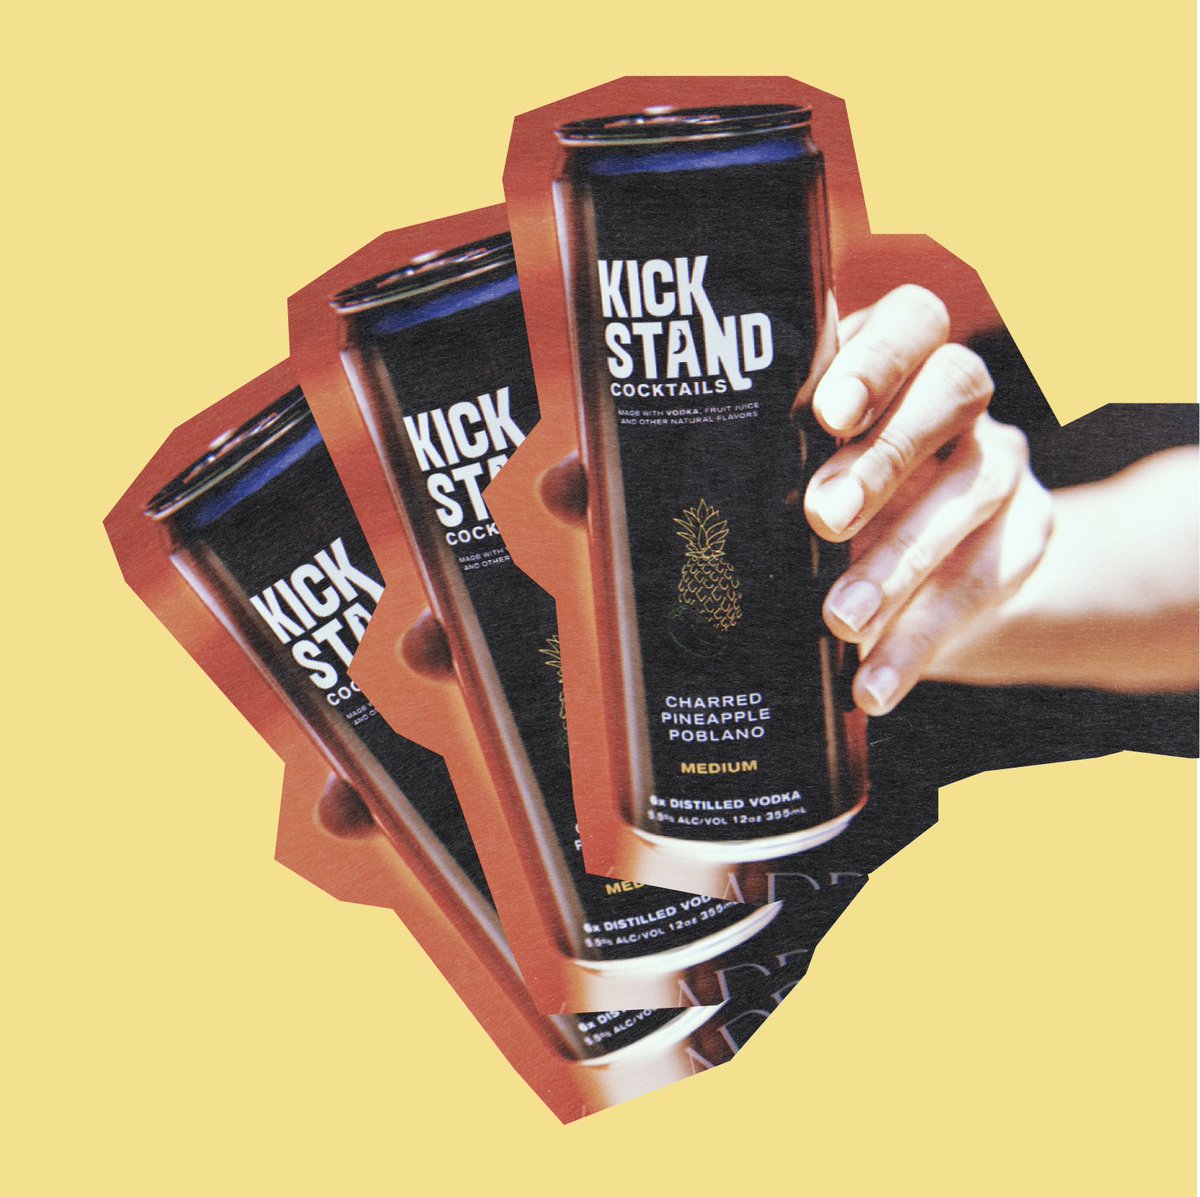 Whoever said that two's company and three's a crowd has clearly never tried Kickstand cocktails before.